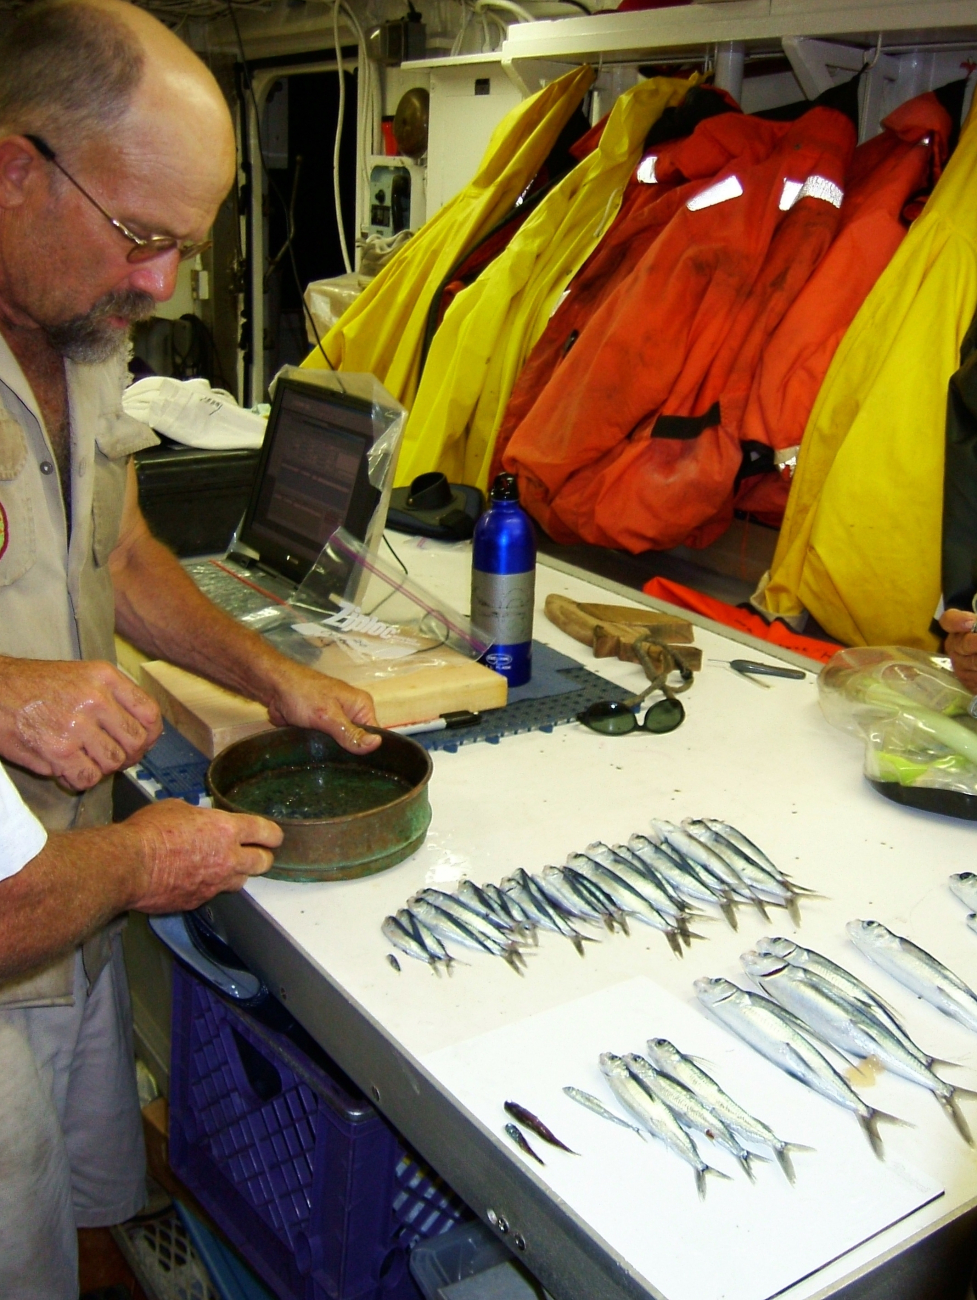 Fisheries scientist with specimens caught by net off the NOAA Ship DAVID STARRJORDAN